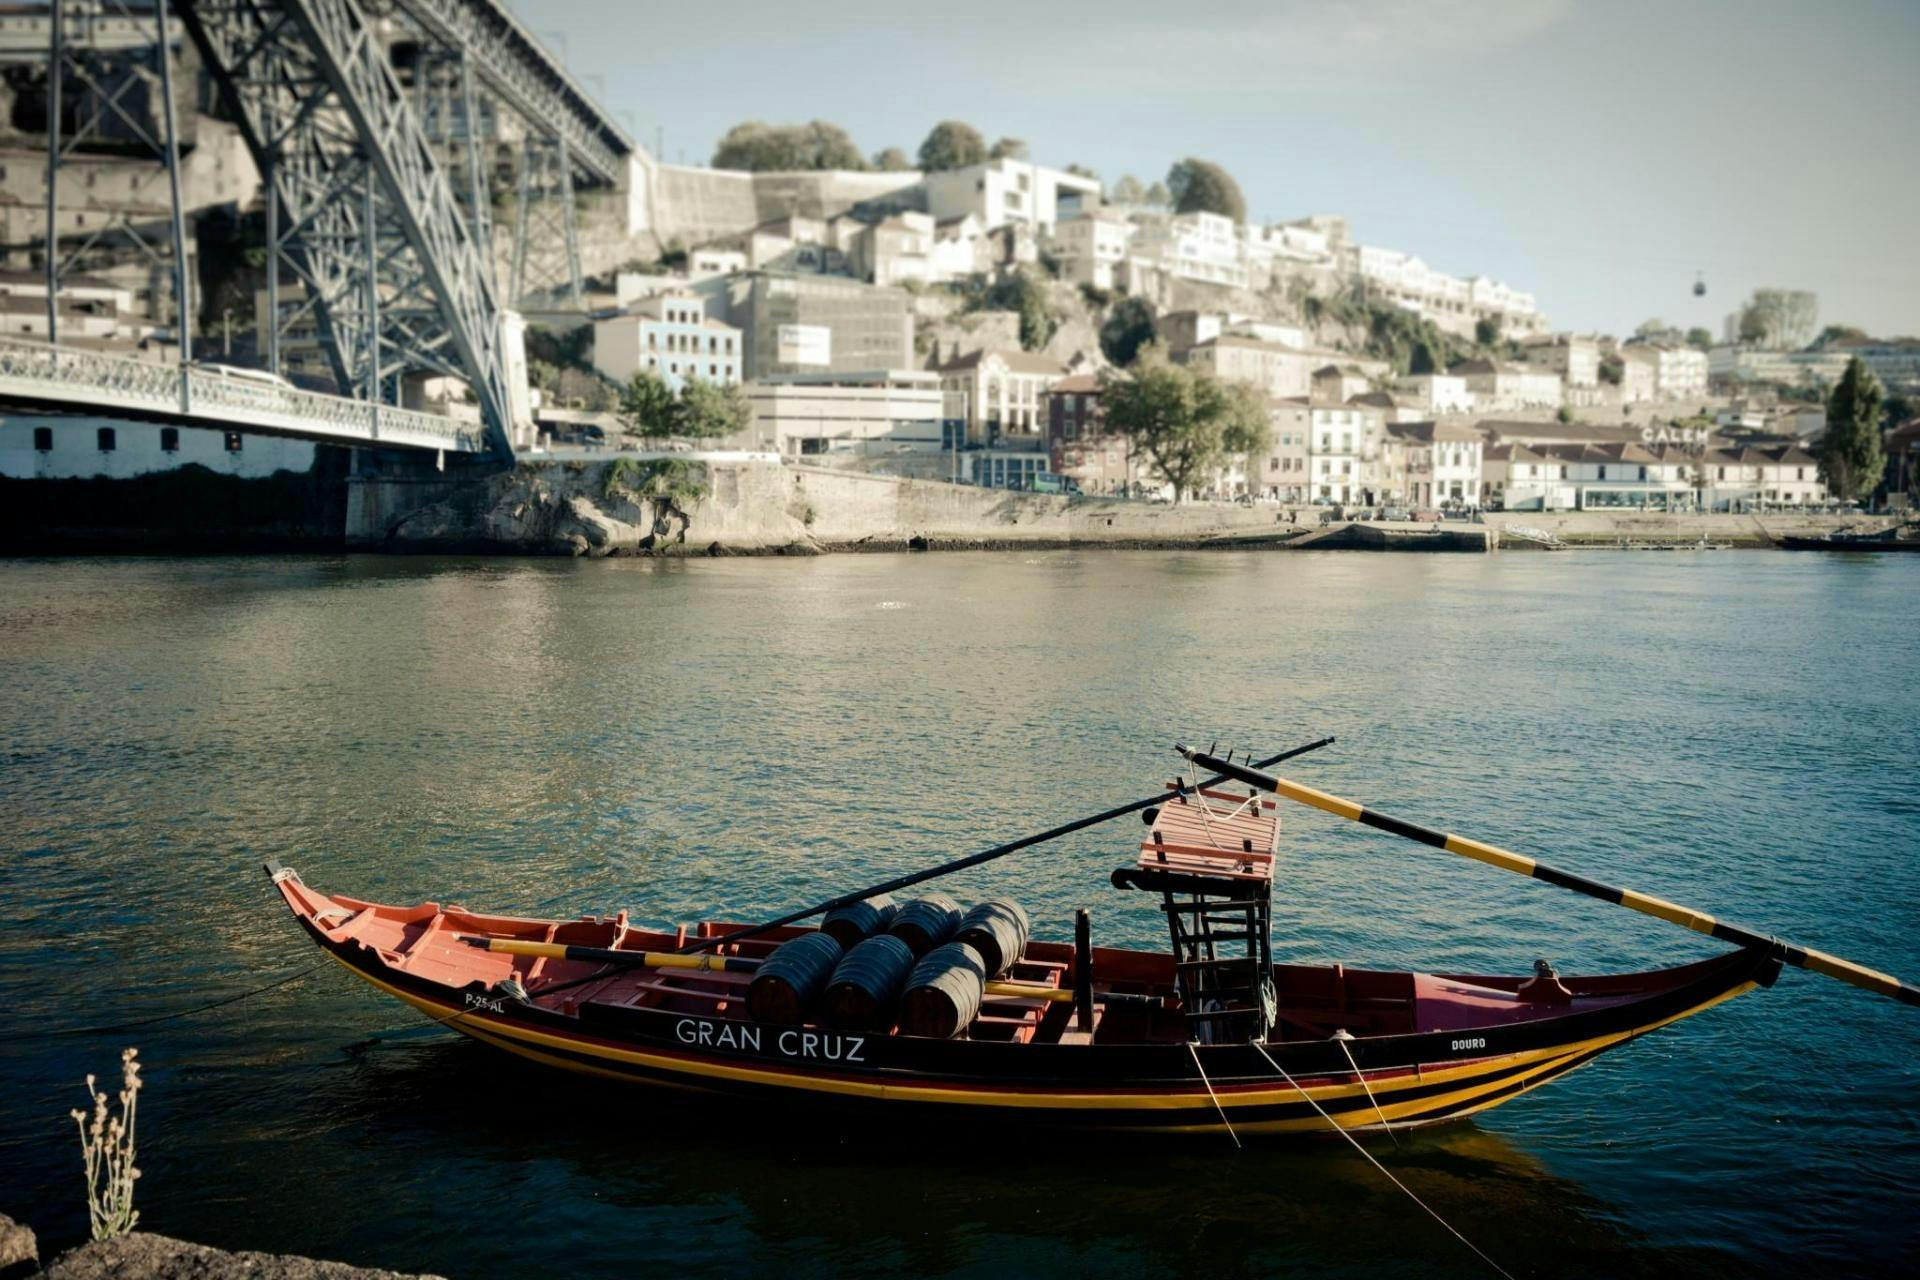 Half-day guided tour of Porto with 6 bridges' cruise and wine tasting